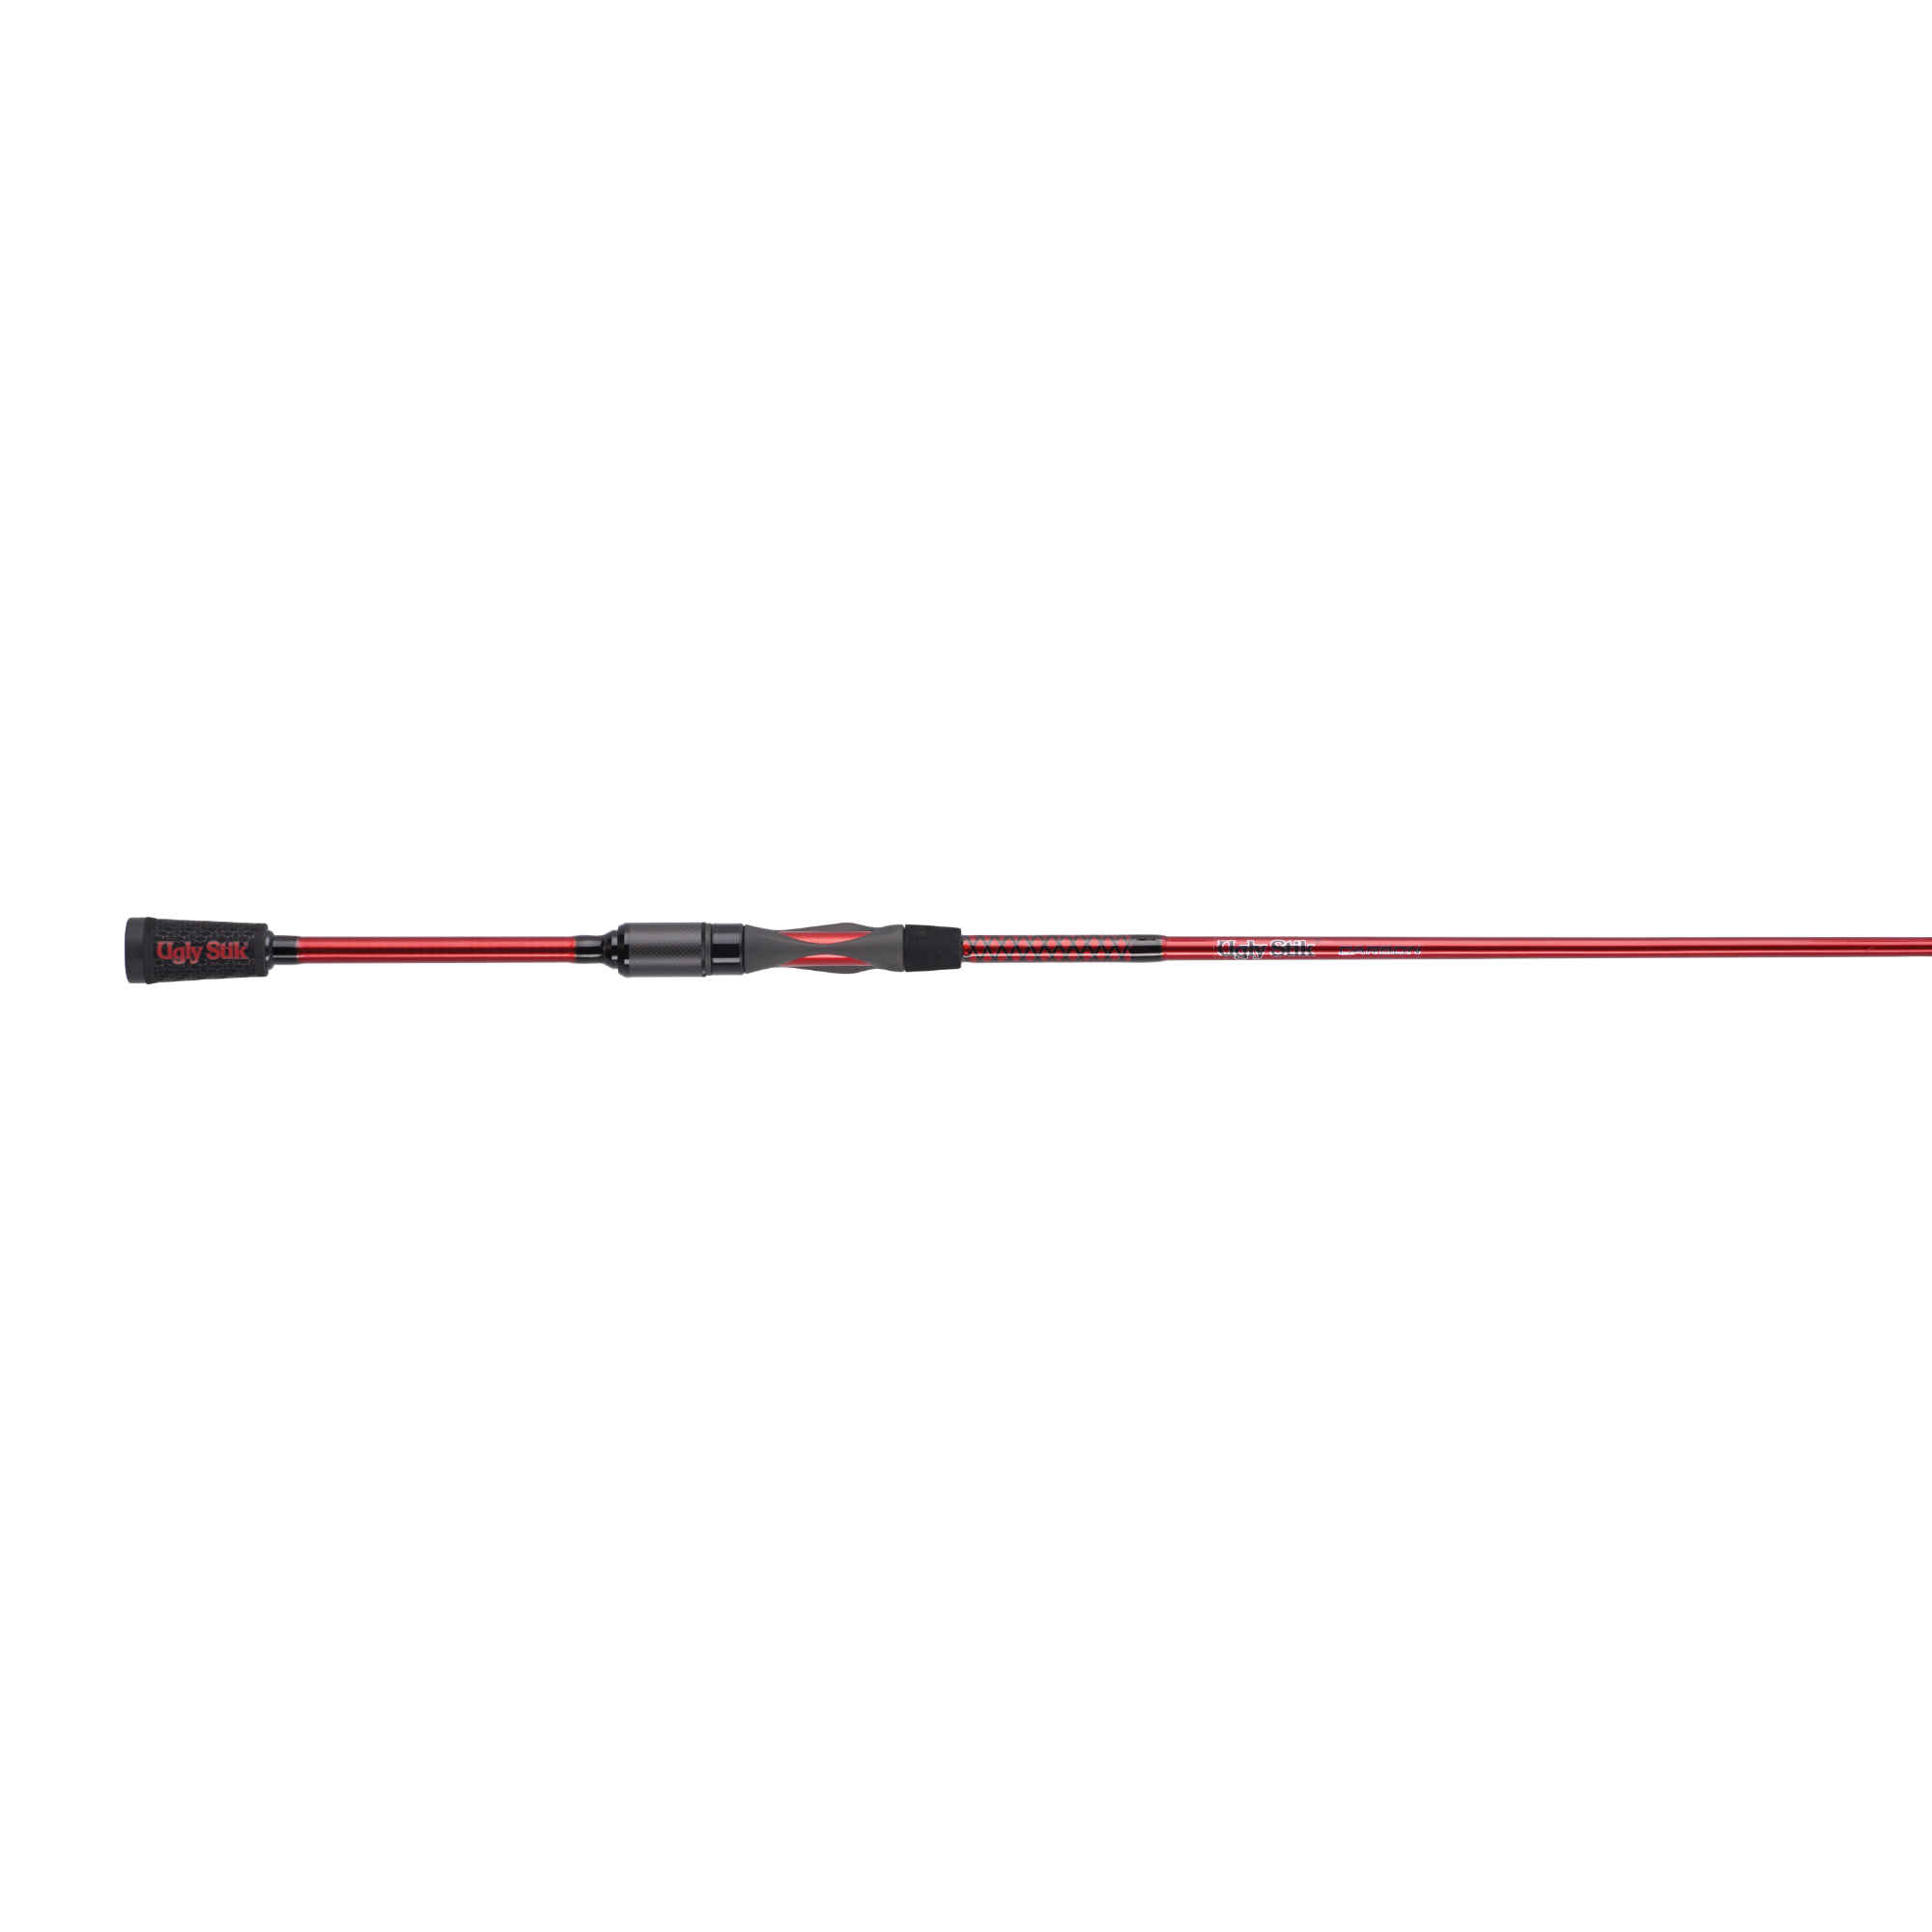 Ugly Stik Carbon Spinning Rod, 2 Piece, Ultra-Light, Moderate, 8 Guides,  1/32-1/8oz Lures USCBSP702UL with Free S&H — CampSaver